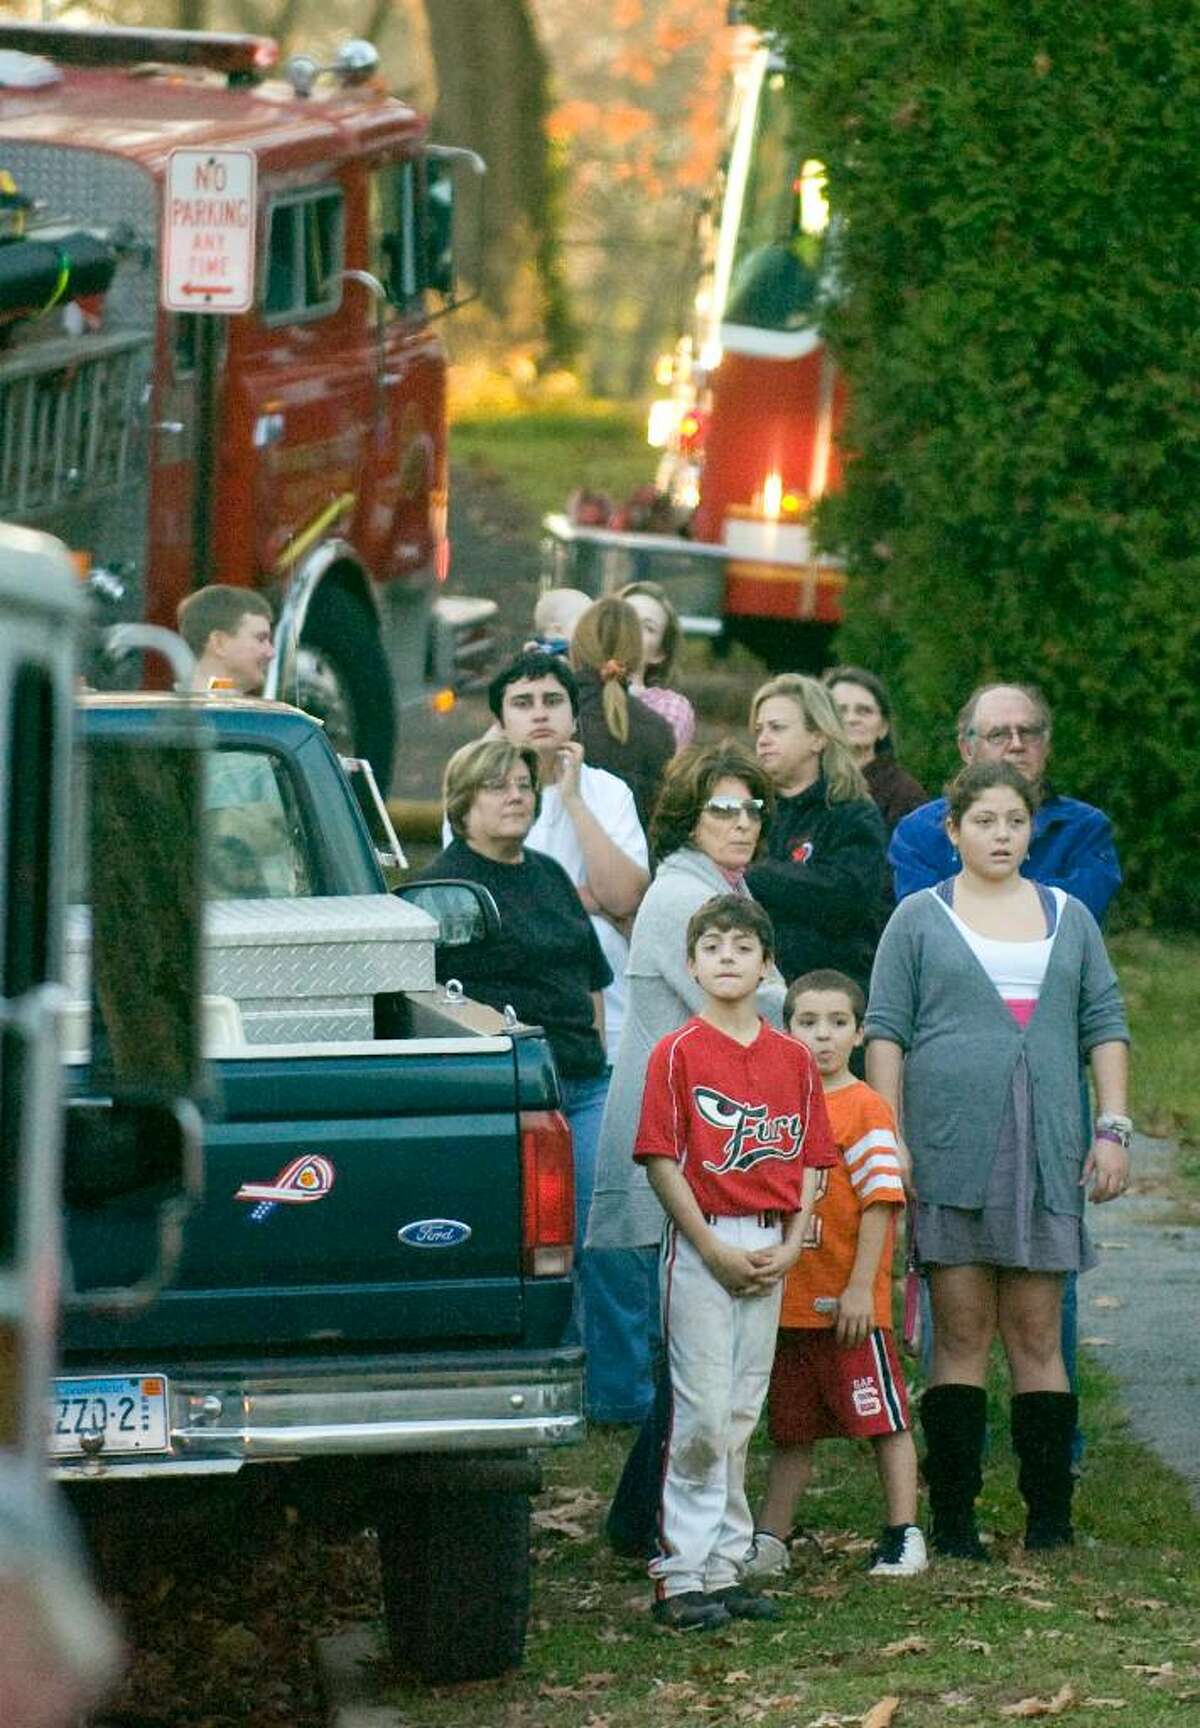 while firefighters battle a fire on Gilford St. in Stamford, Nov. 3, 2009.